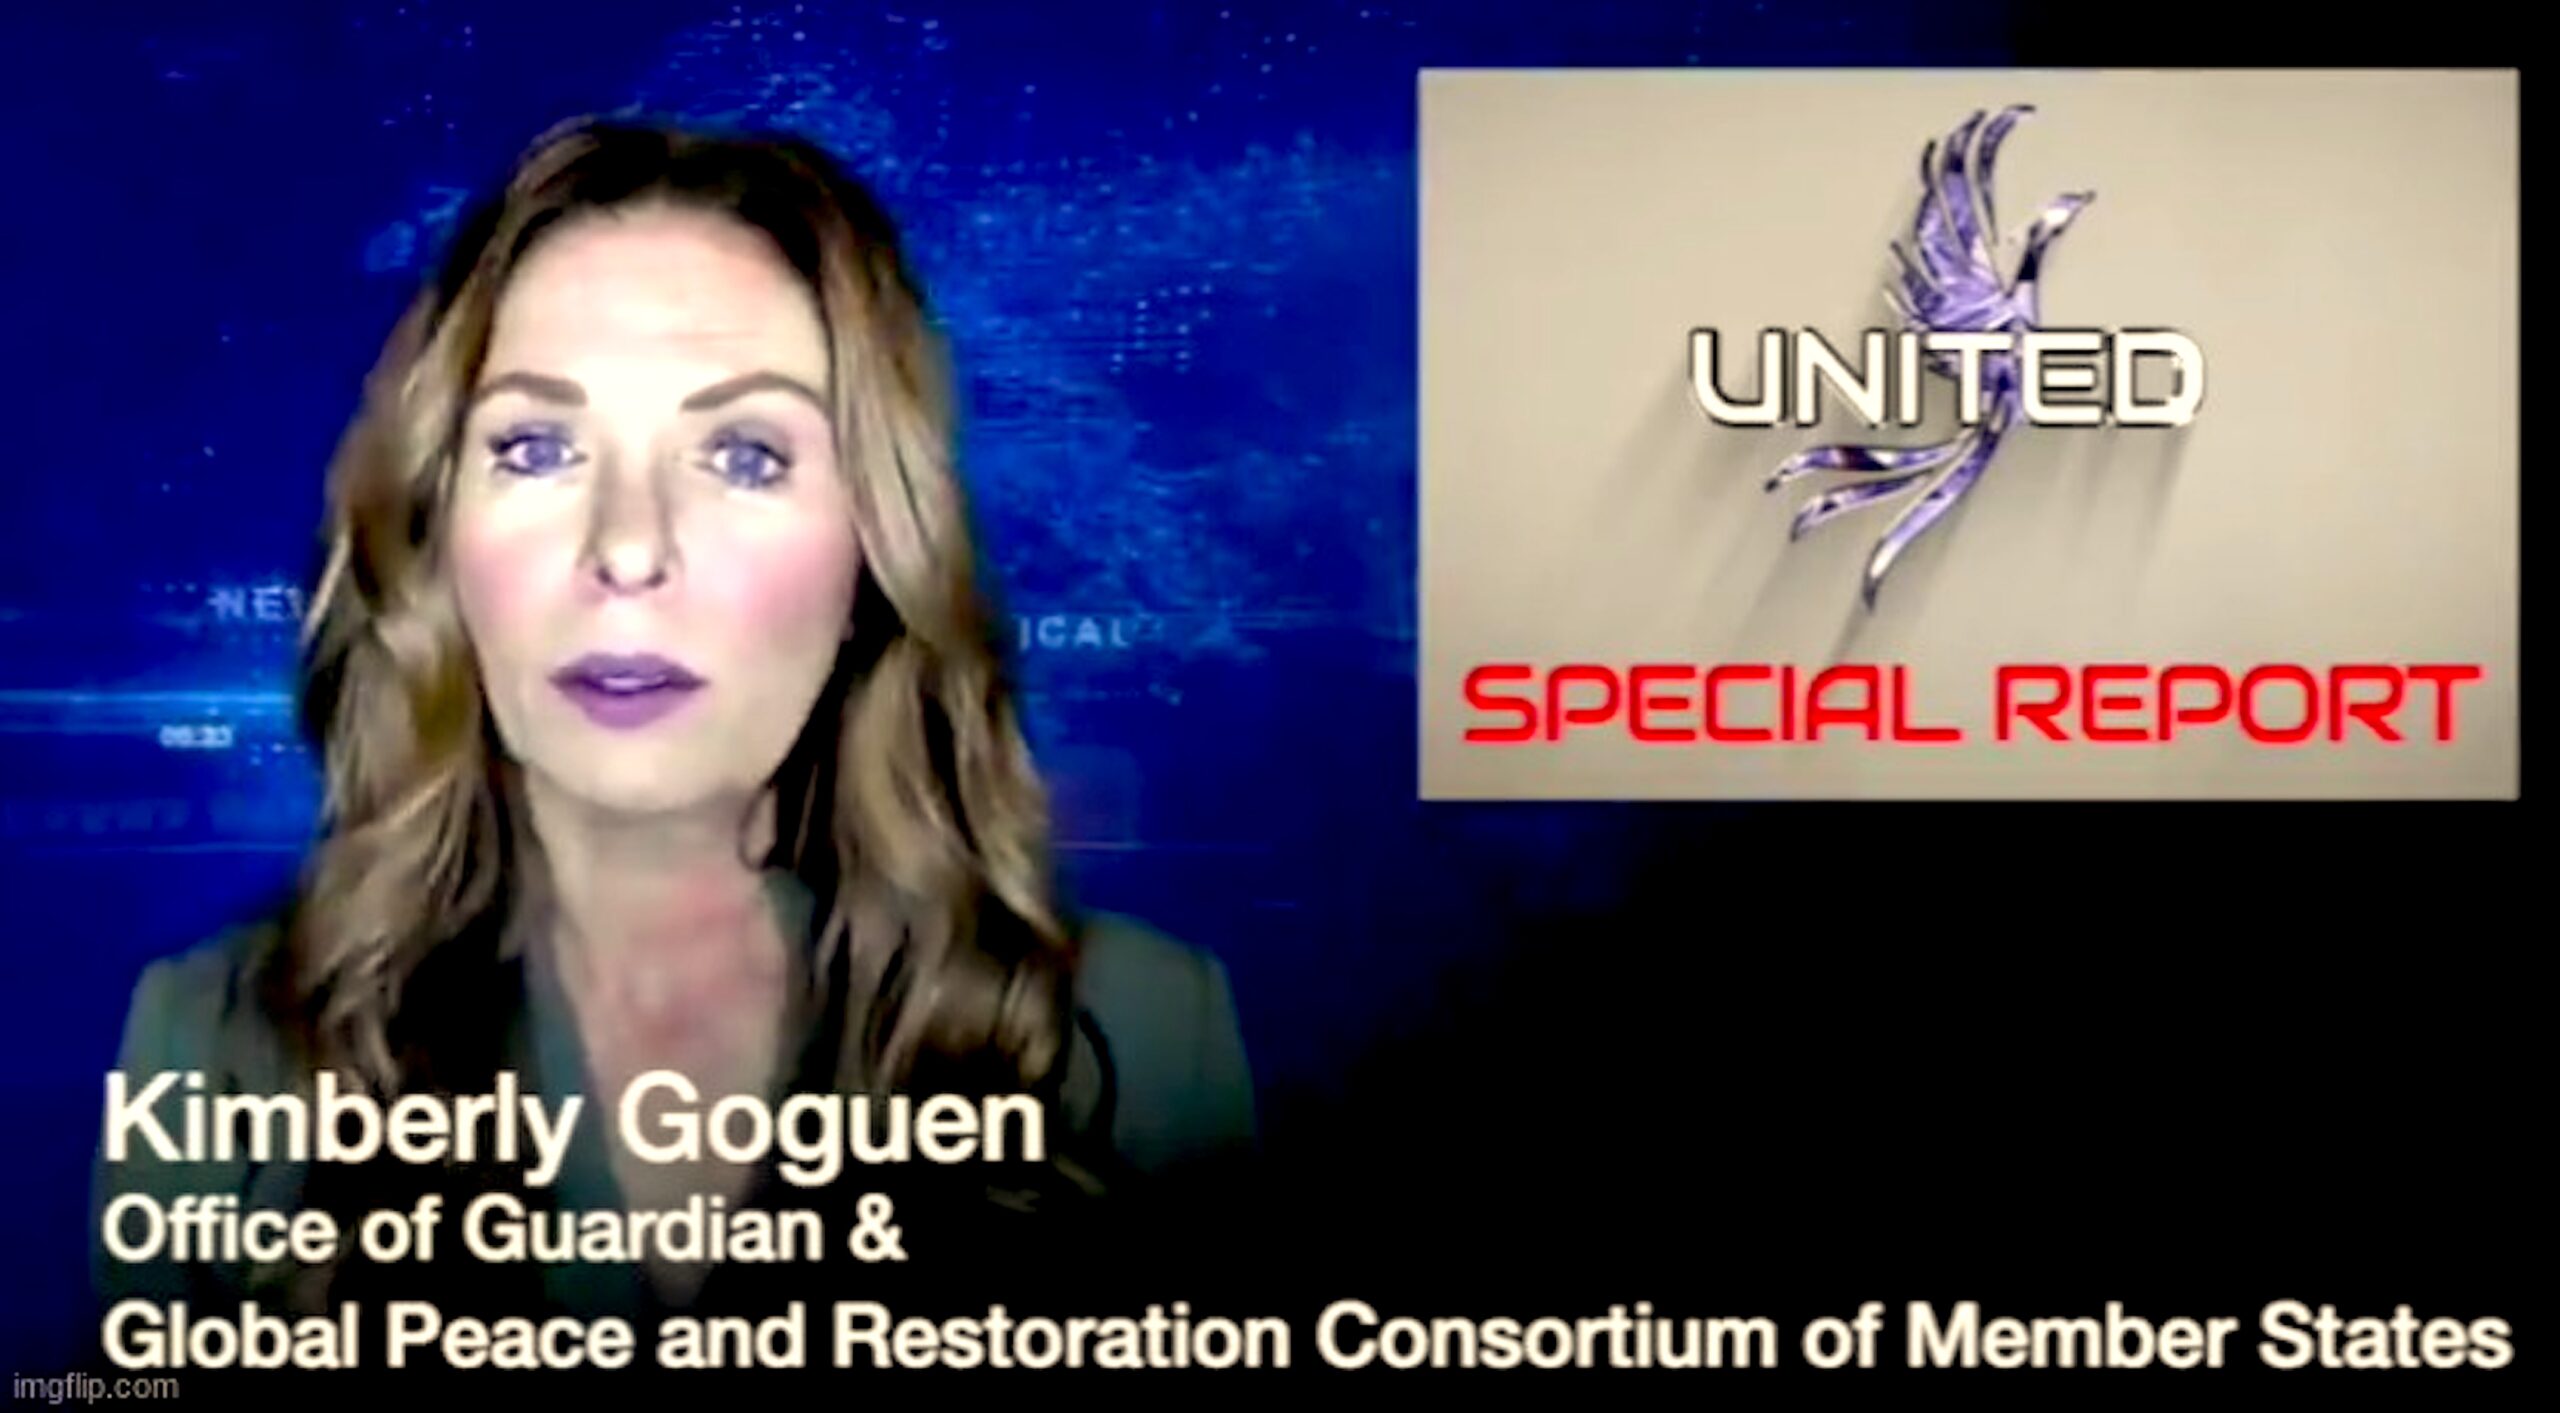 Kimberrly Goguen, Office of Guardian & Global Peace and Restoration